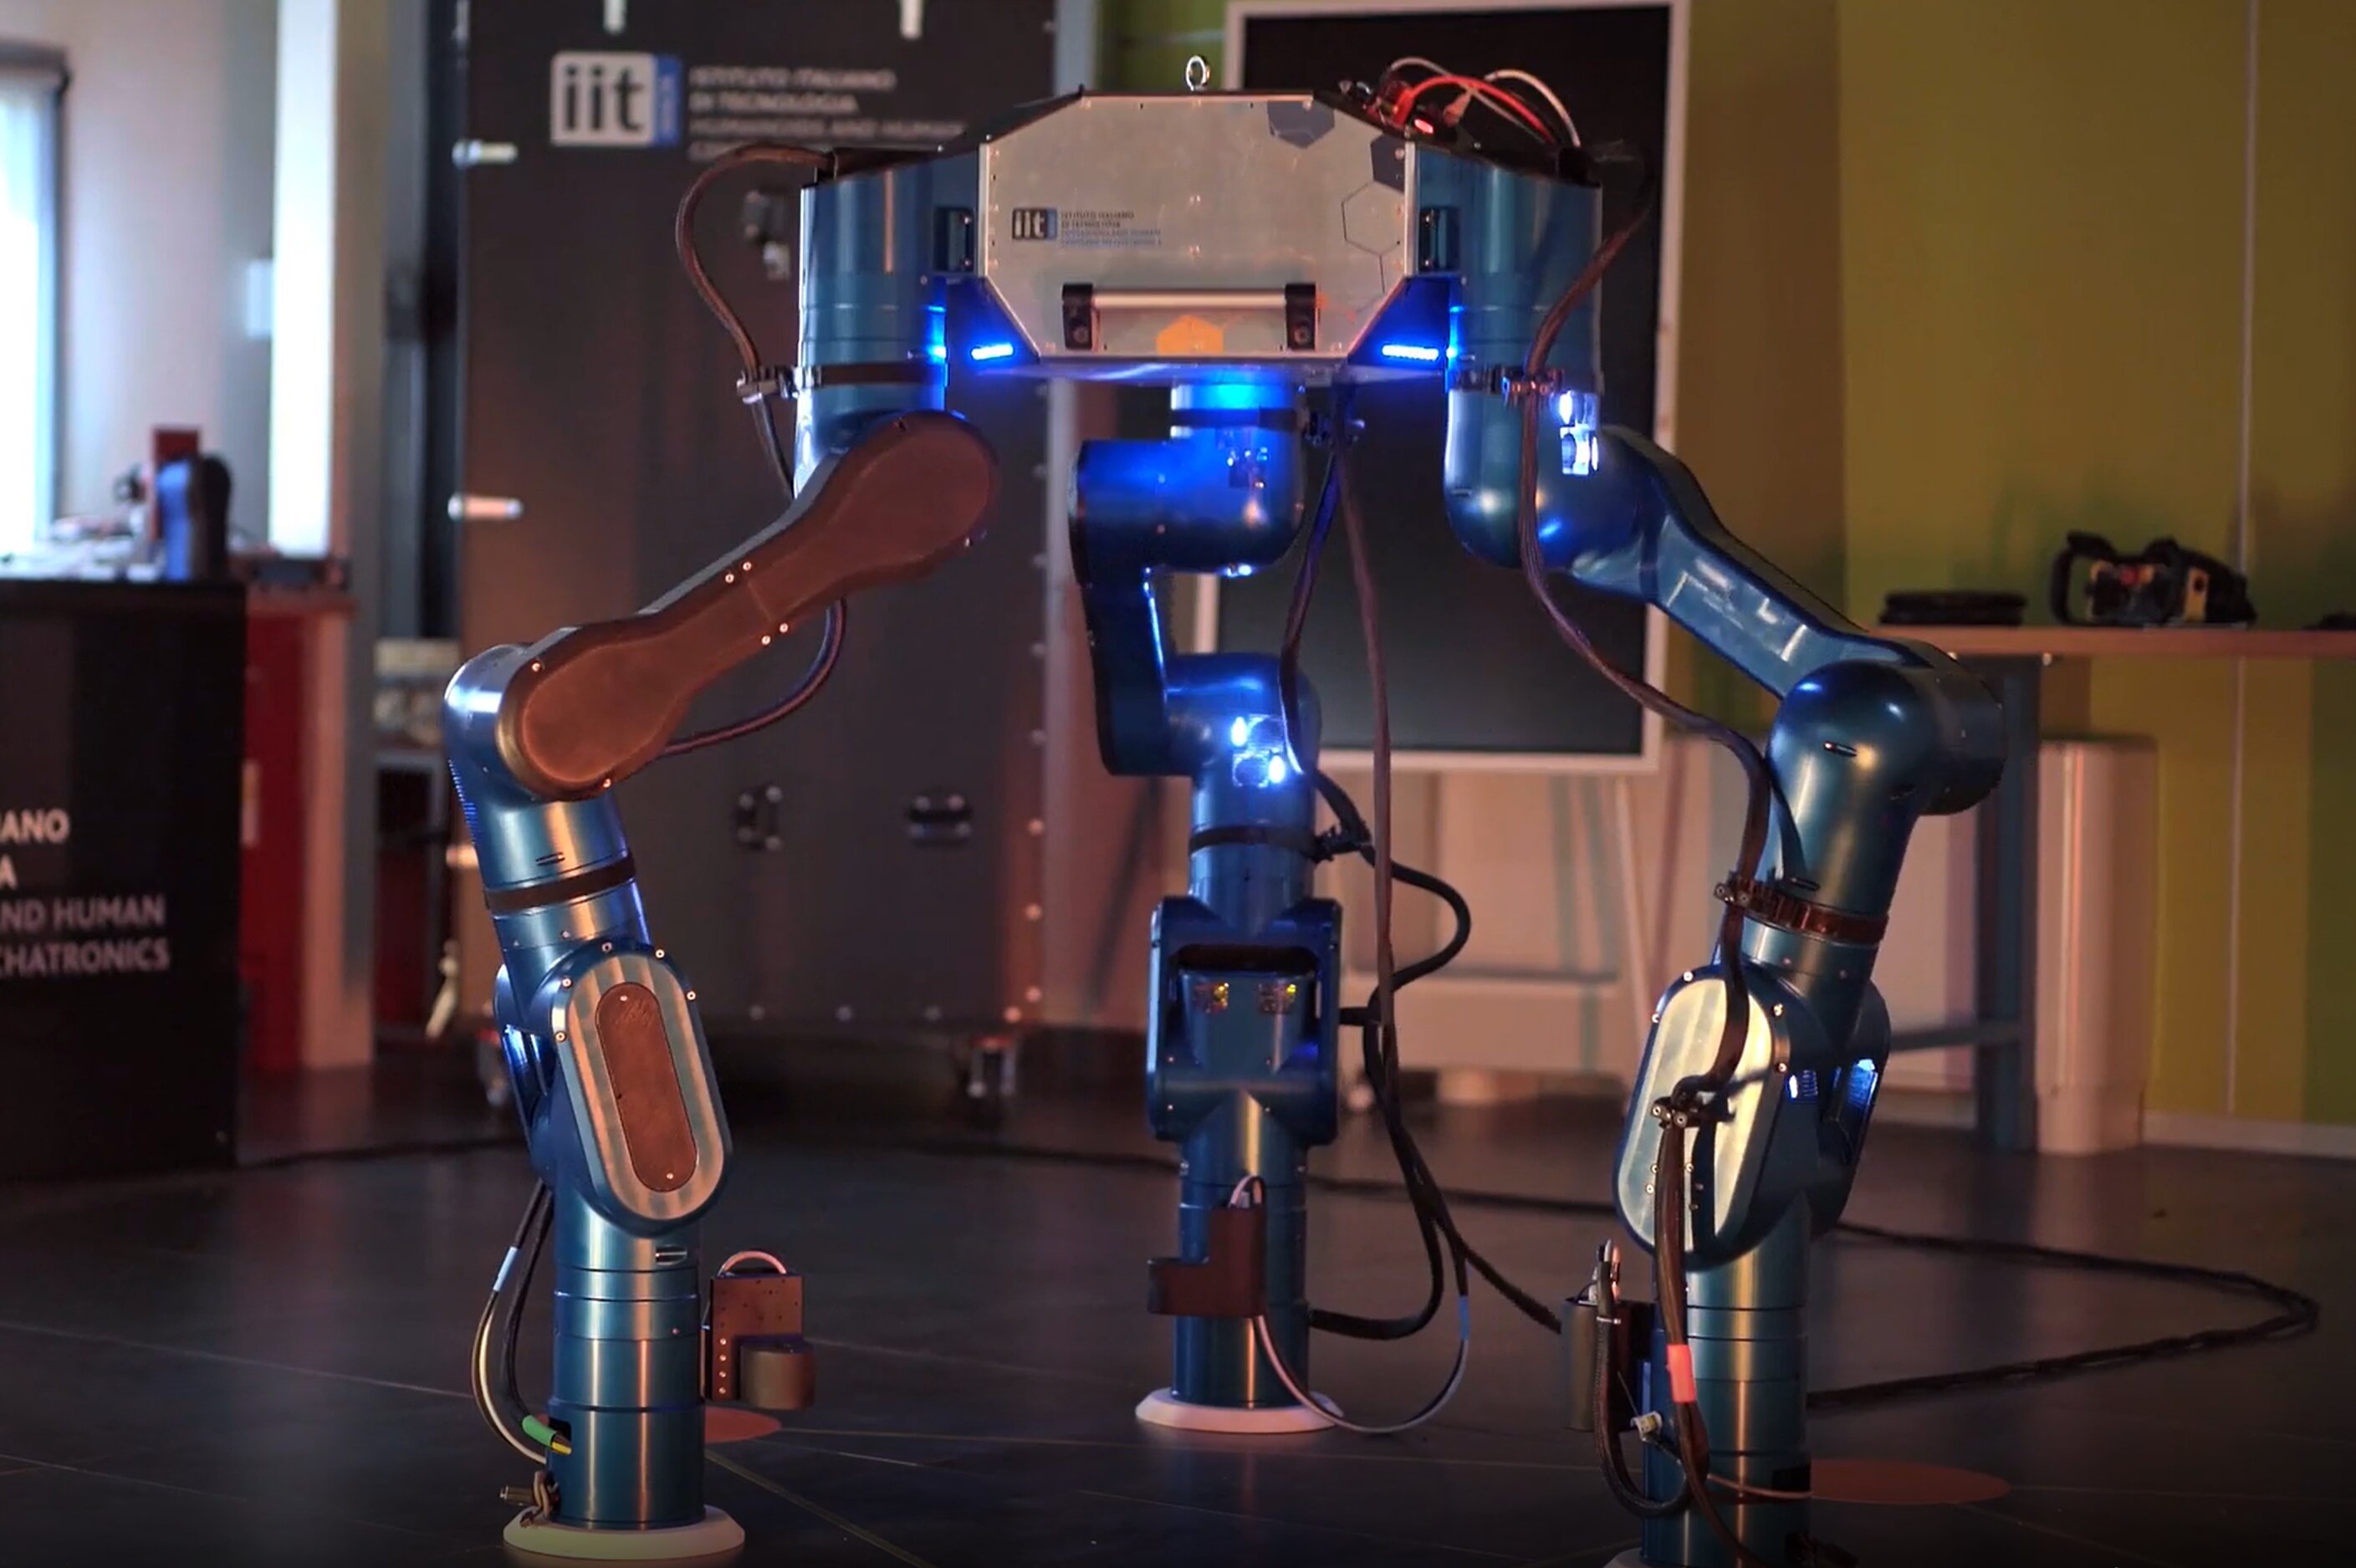 MARM, the new three-legged robot to transport weights and manipulate components in space